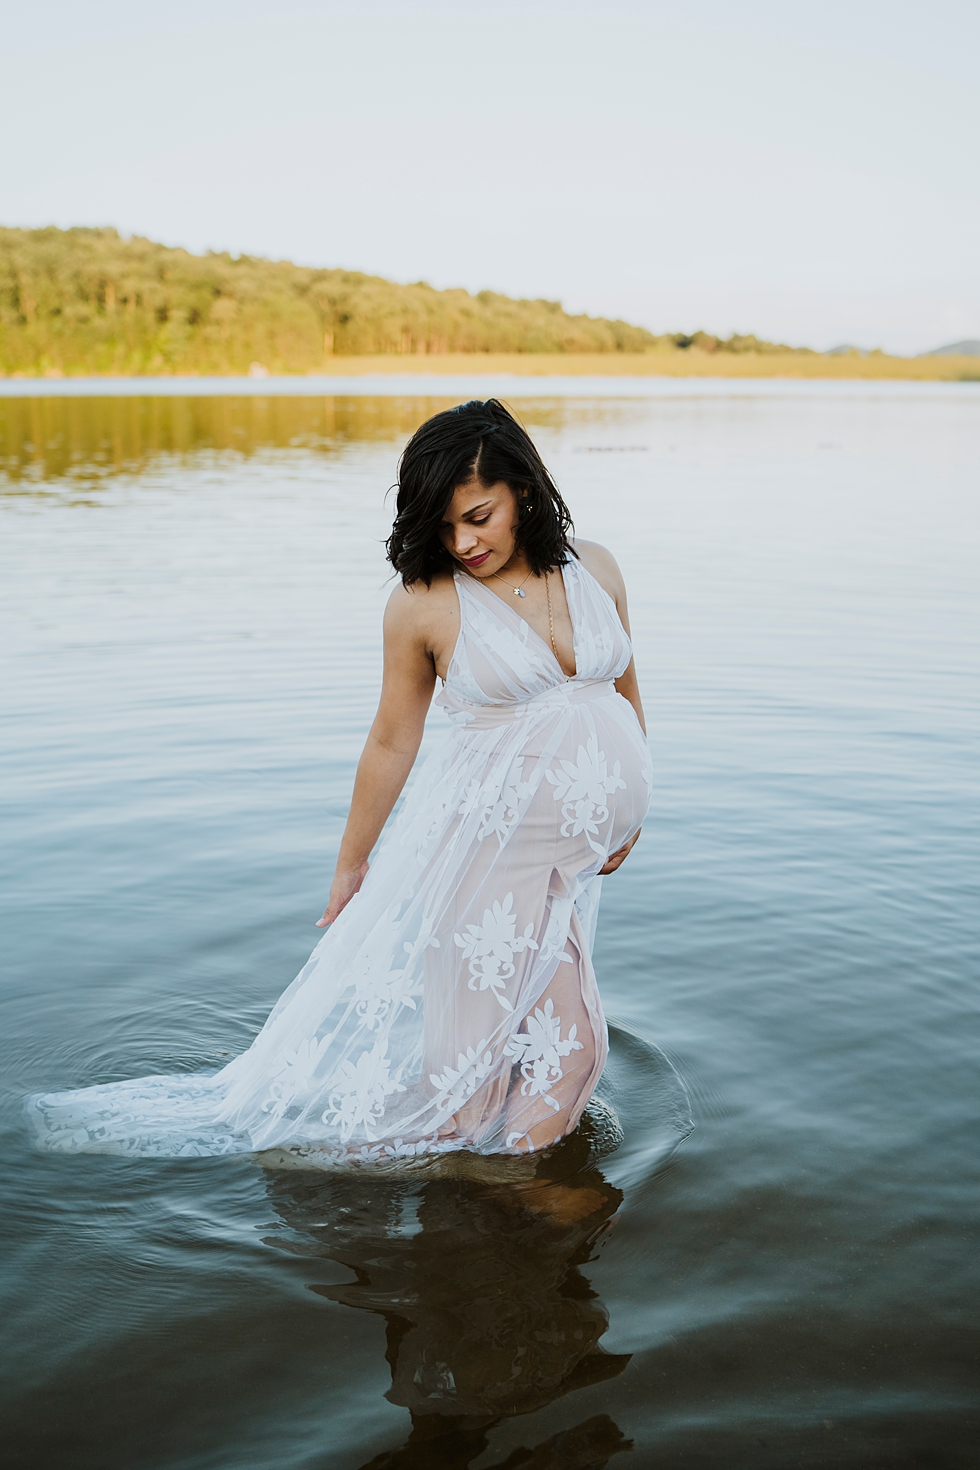  MAMMA TO BE IN WHITE LACE SHEER DRESS FLOATING IN THE WATER CINCINNATI MATERNITY PHOTOGRAPHER #photographer #maternityphotos #pregnancy #babybump #maternityphotoshoot #cincinnatiphotographer #louisvillephotographer 